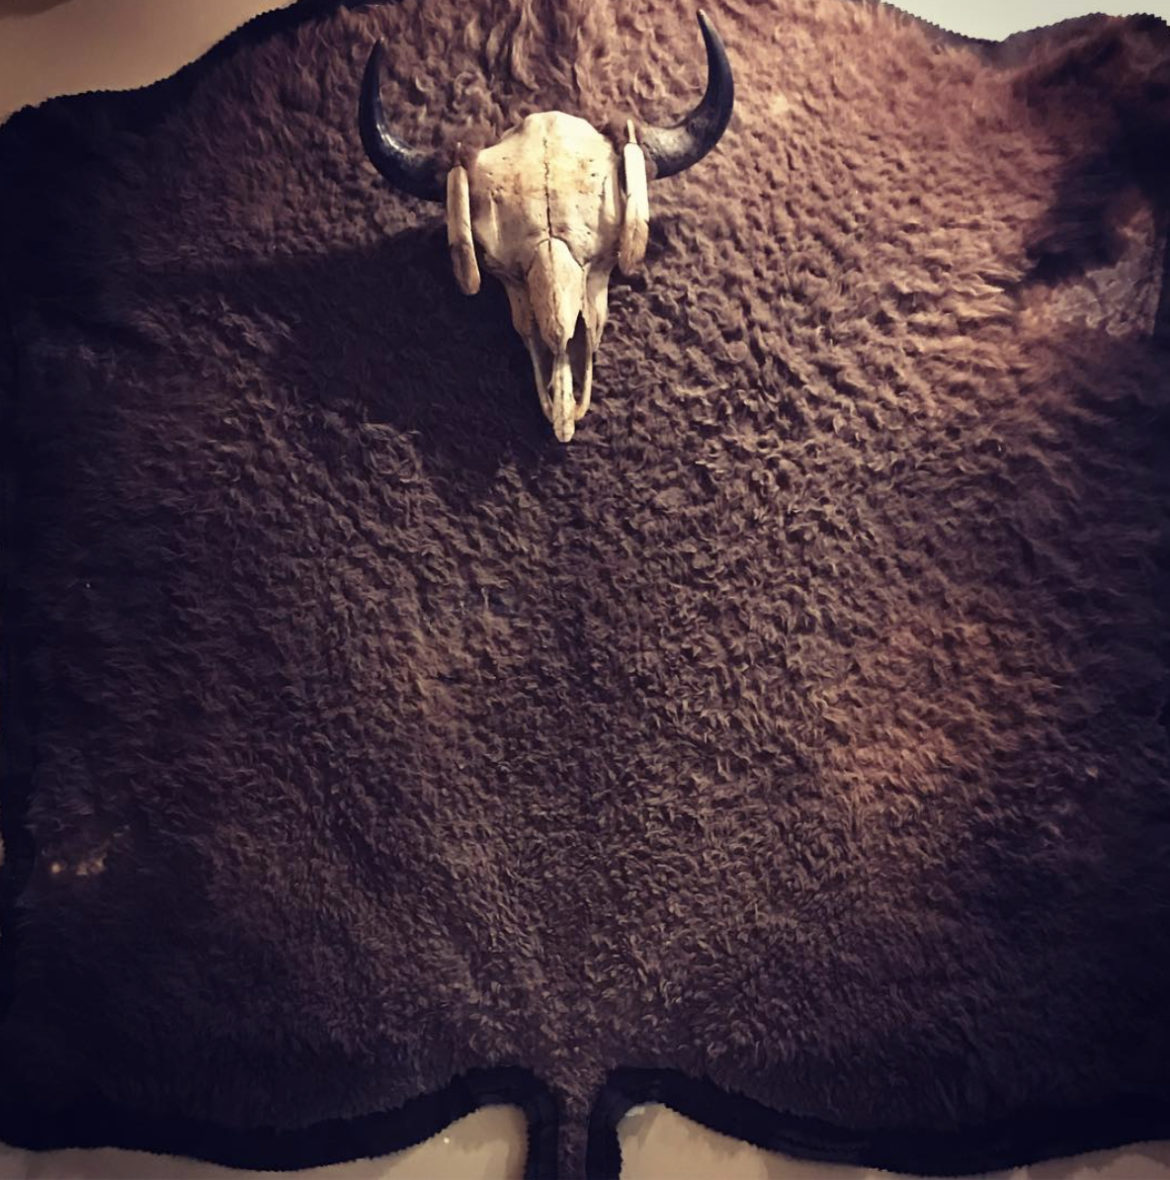 A hotel bed's headboard covered in cowhide, with a bull's skull near the top.